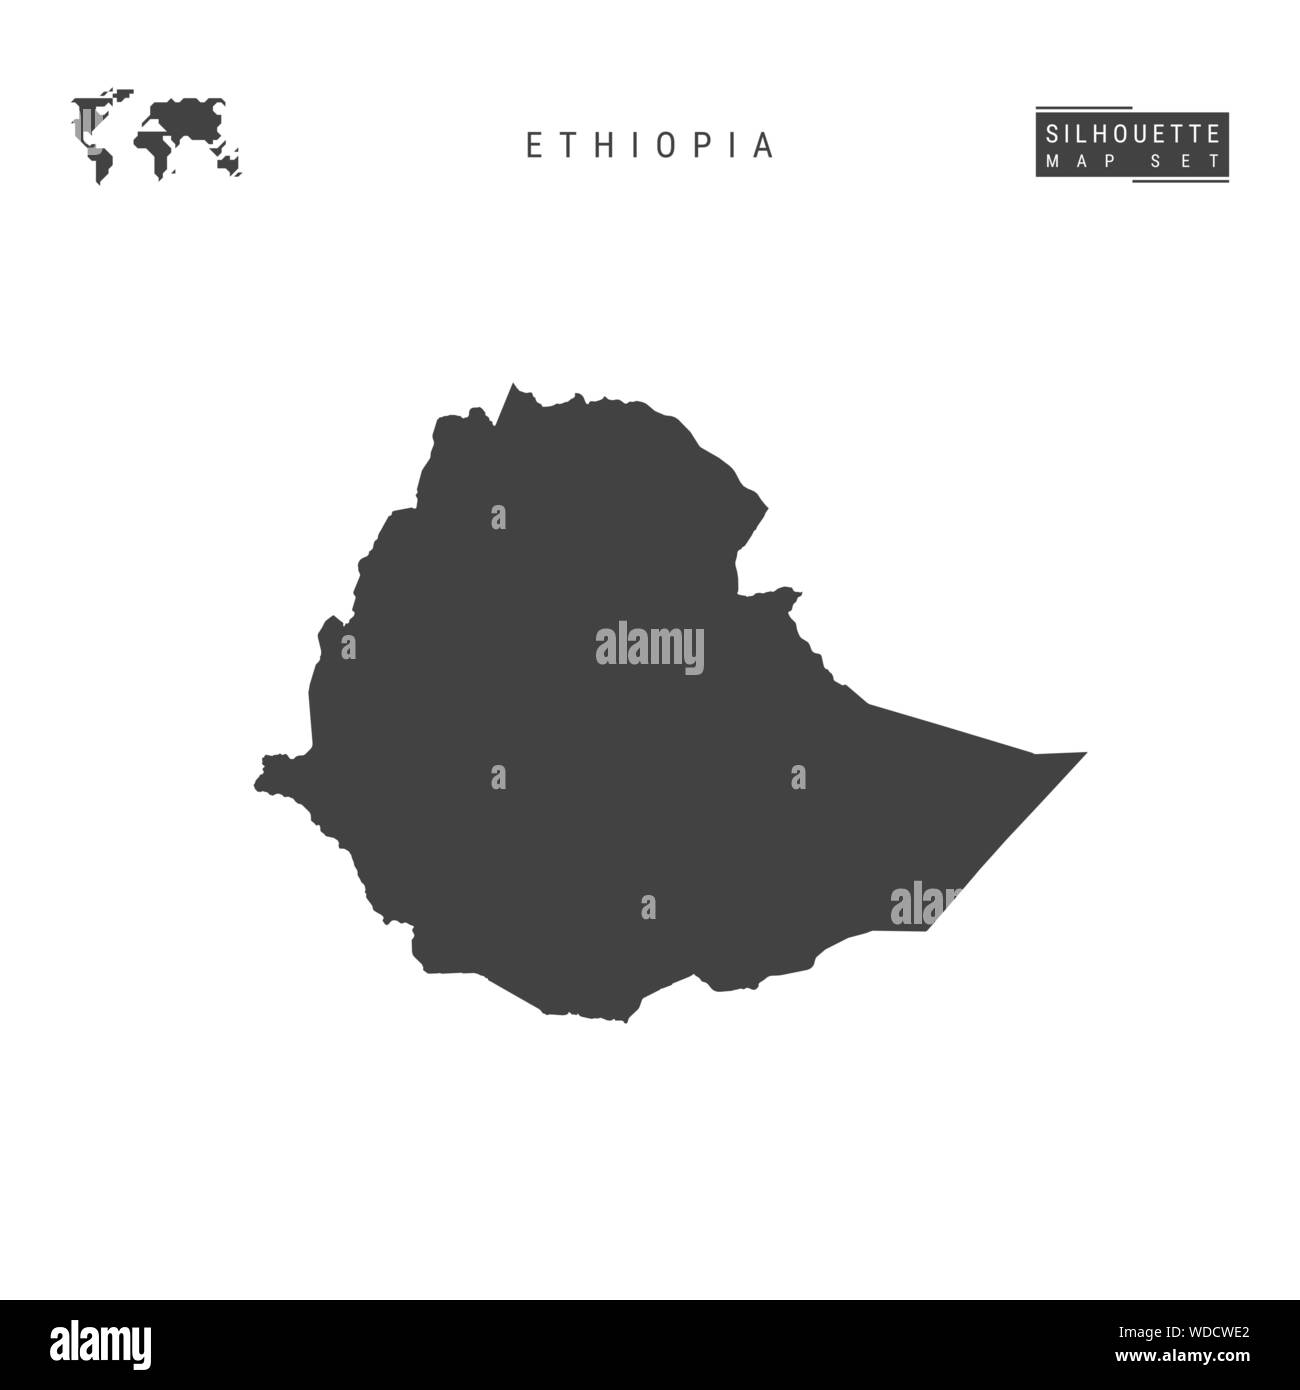 Ethiopia Blank Vector Map Isolated on White Background. High-Detailed Black Silhouette Map of Ethiopia. Stock Vector